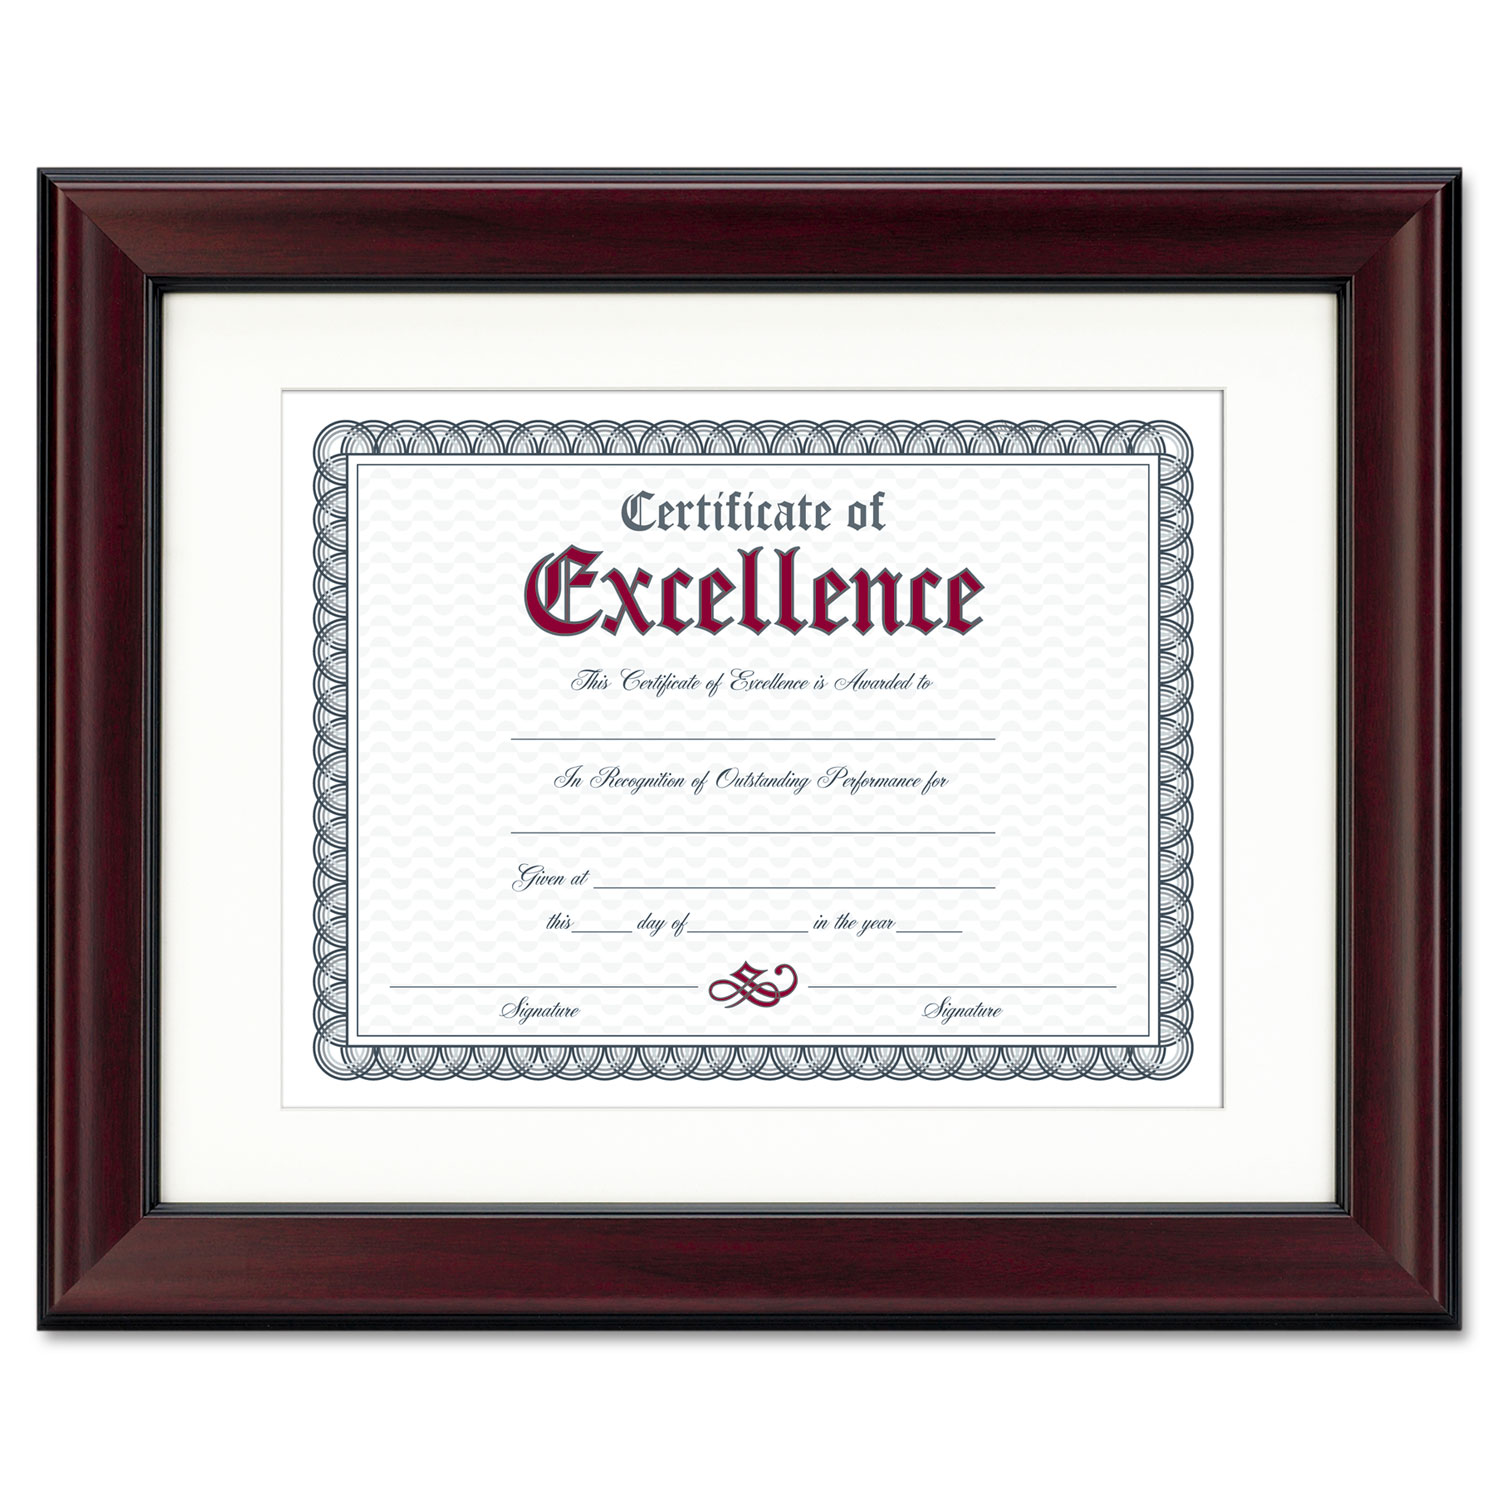  DAX N3246S1T Rosewood Document Frame, Wall-Mount, Plastic, 11 x 14, 8 1/2 x 11 (DAXN3246S1T) 